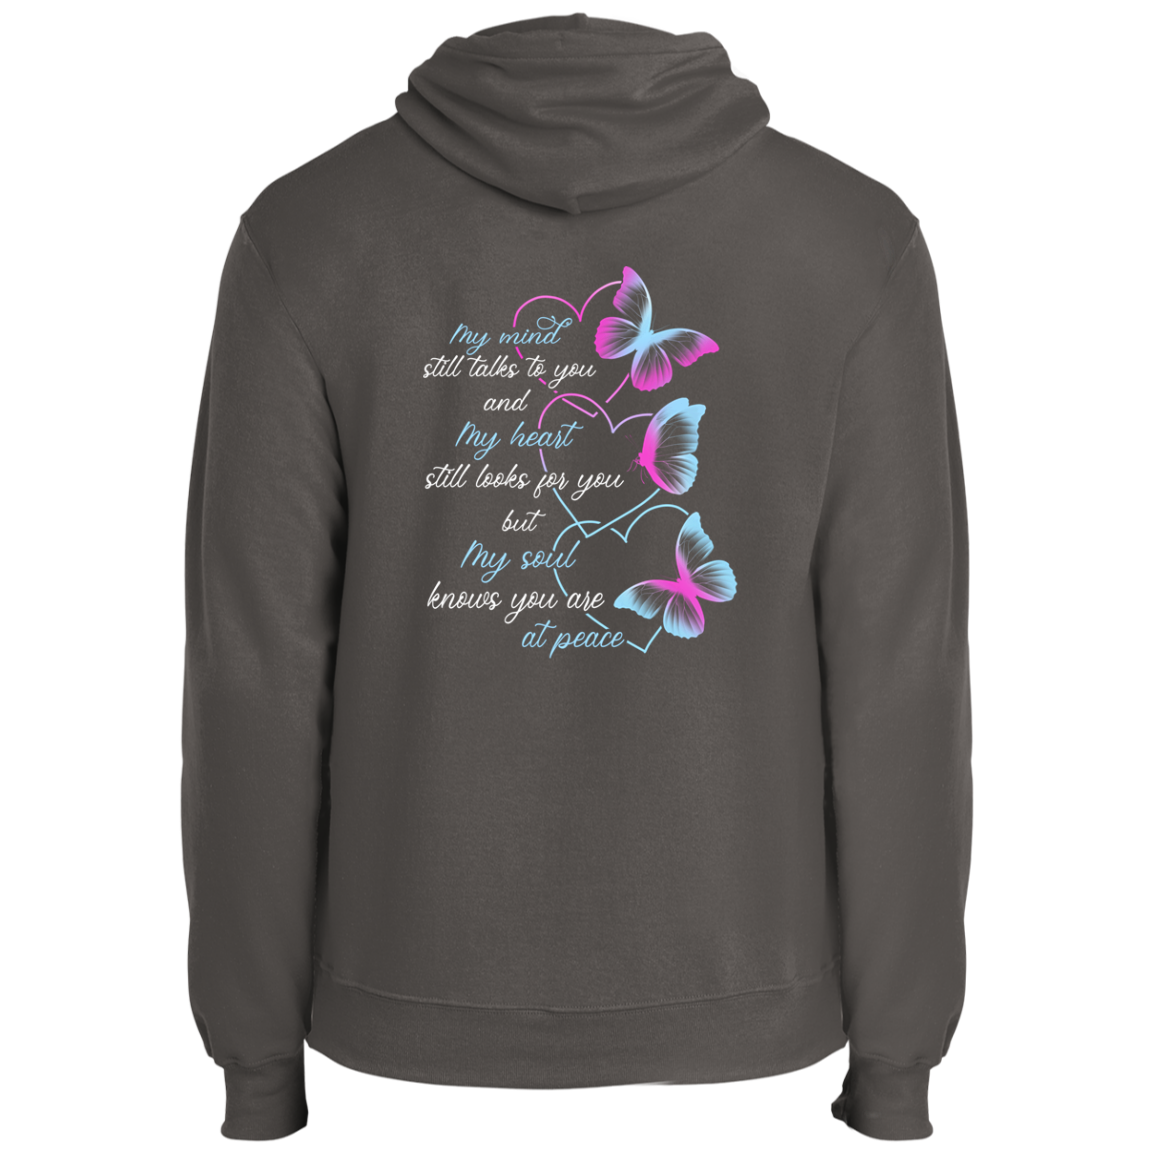 At Peace Fleece Pullover Hoodie